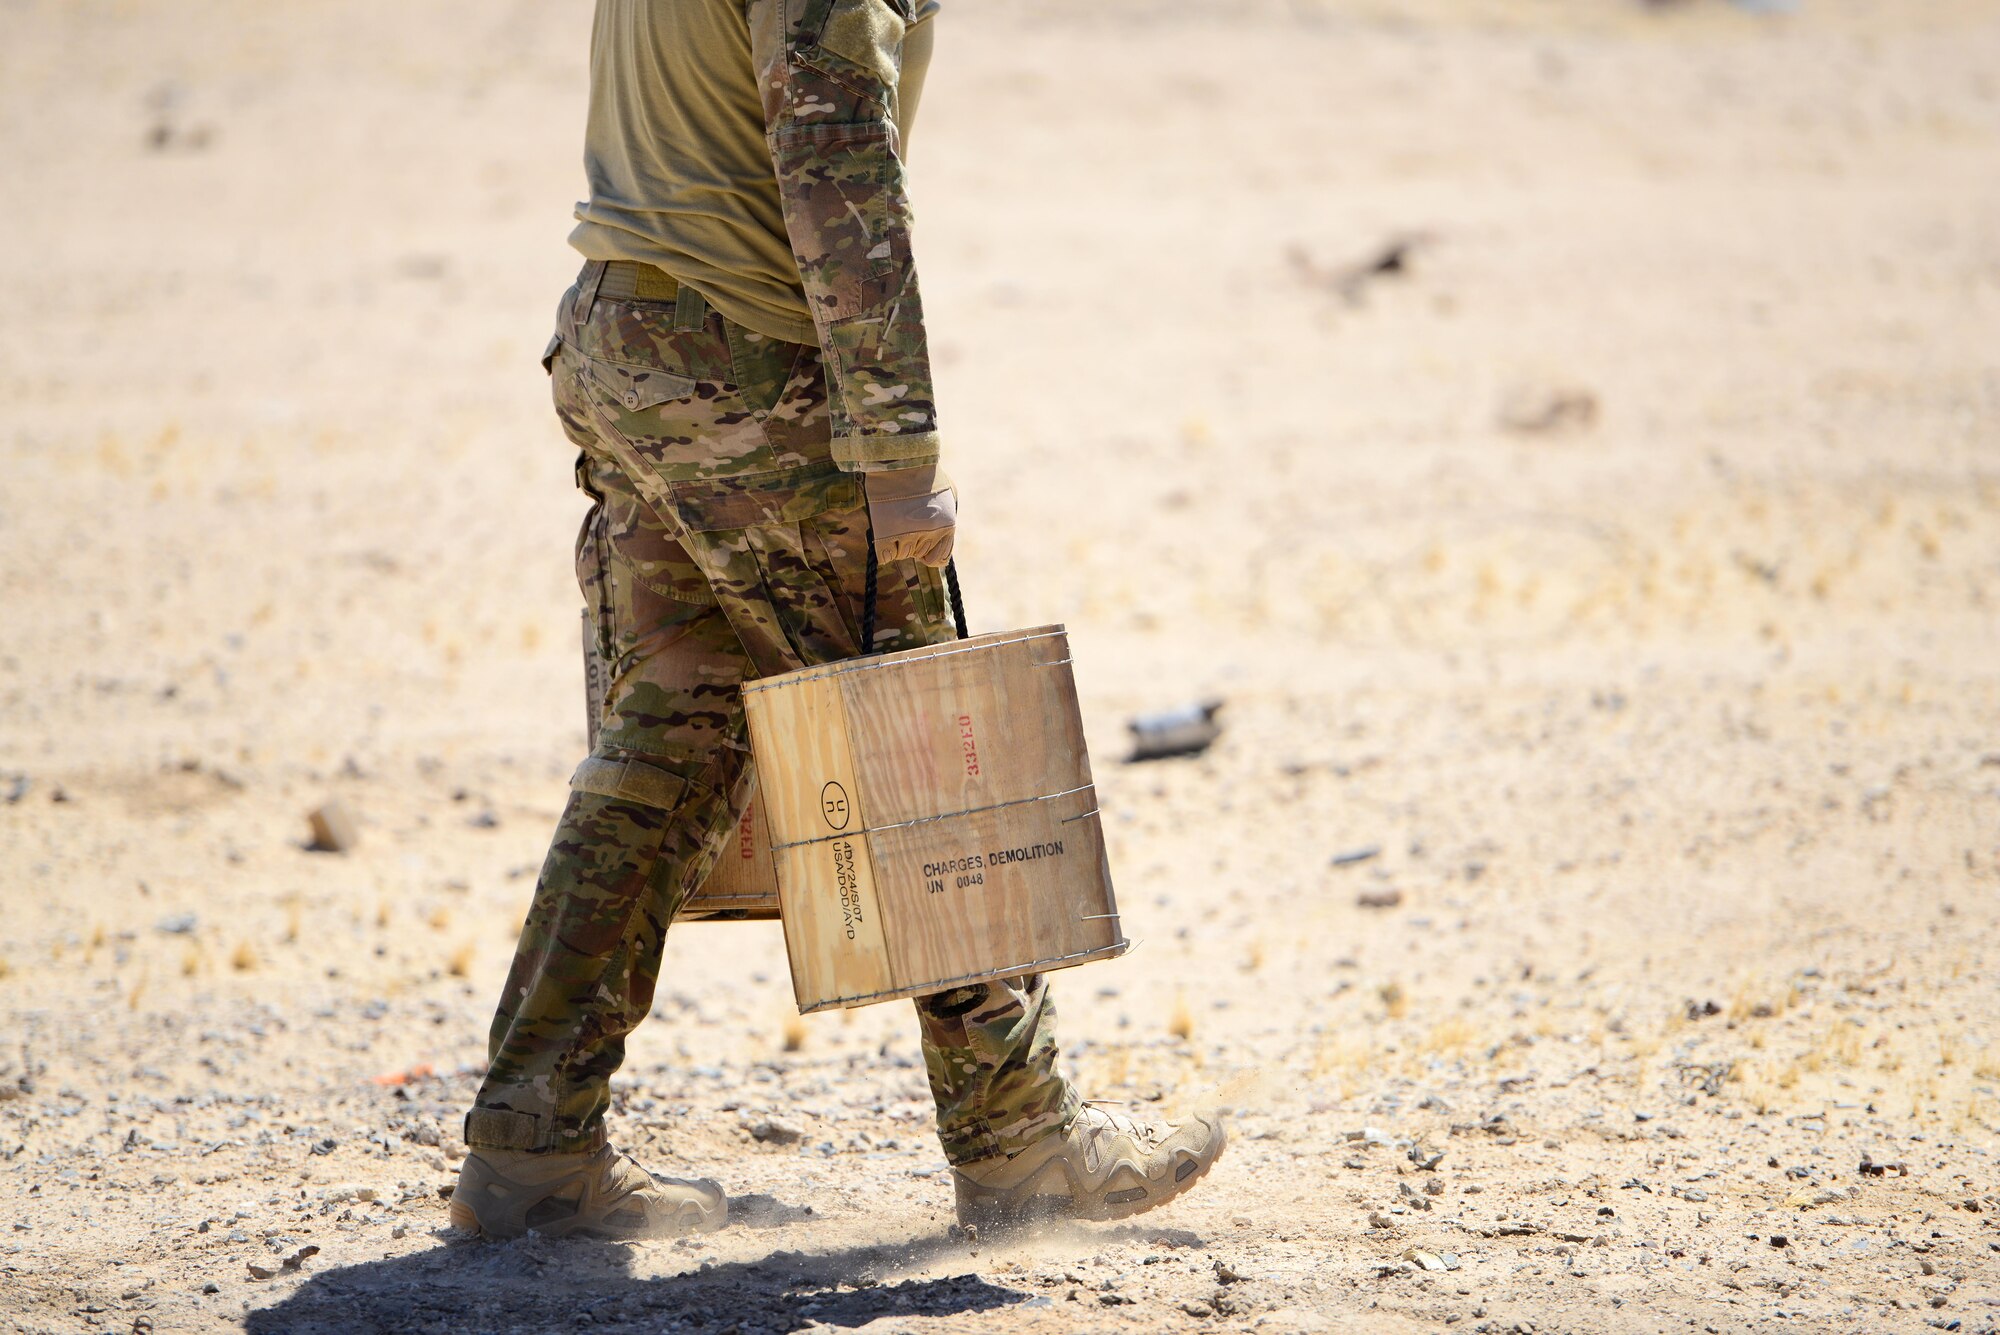 U.S. Air Force explosive ordnance disposal technicians assigned to the 407th Expeditionary Civil Engineer Squadron, carry C-4 explosives to the blast site at the range during a coordinated detonation in Southwest Asia on June 6, 2017. Explosive ordnance disposal technicians are charged with locating, identifying, disarming, neutralizing, recovering, and disposing of hazardous explosives; conventional, chemical, biological, incendiary, and nuclear ordnance; and criminal or terrorist devices.  (U.S. Air Force photo by Tech Sgt. Andy M. Kin)